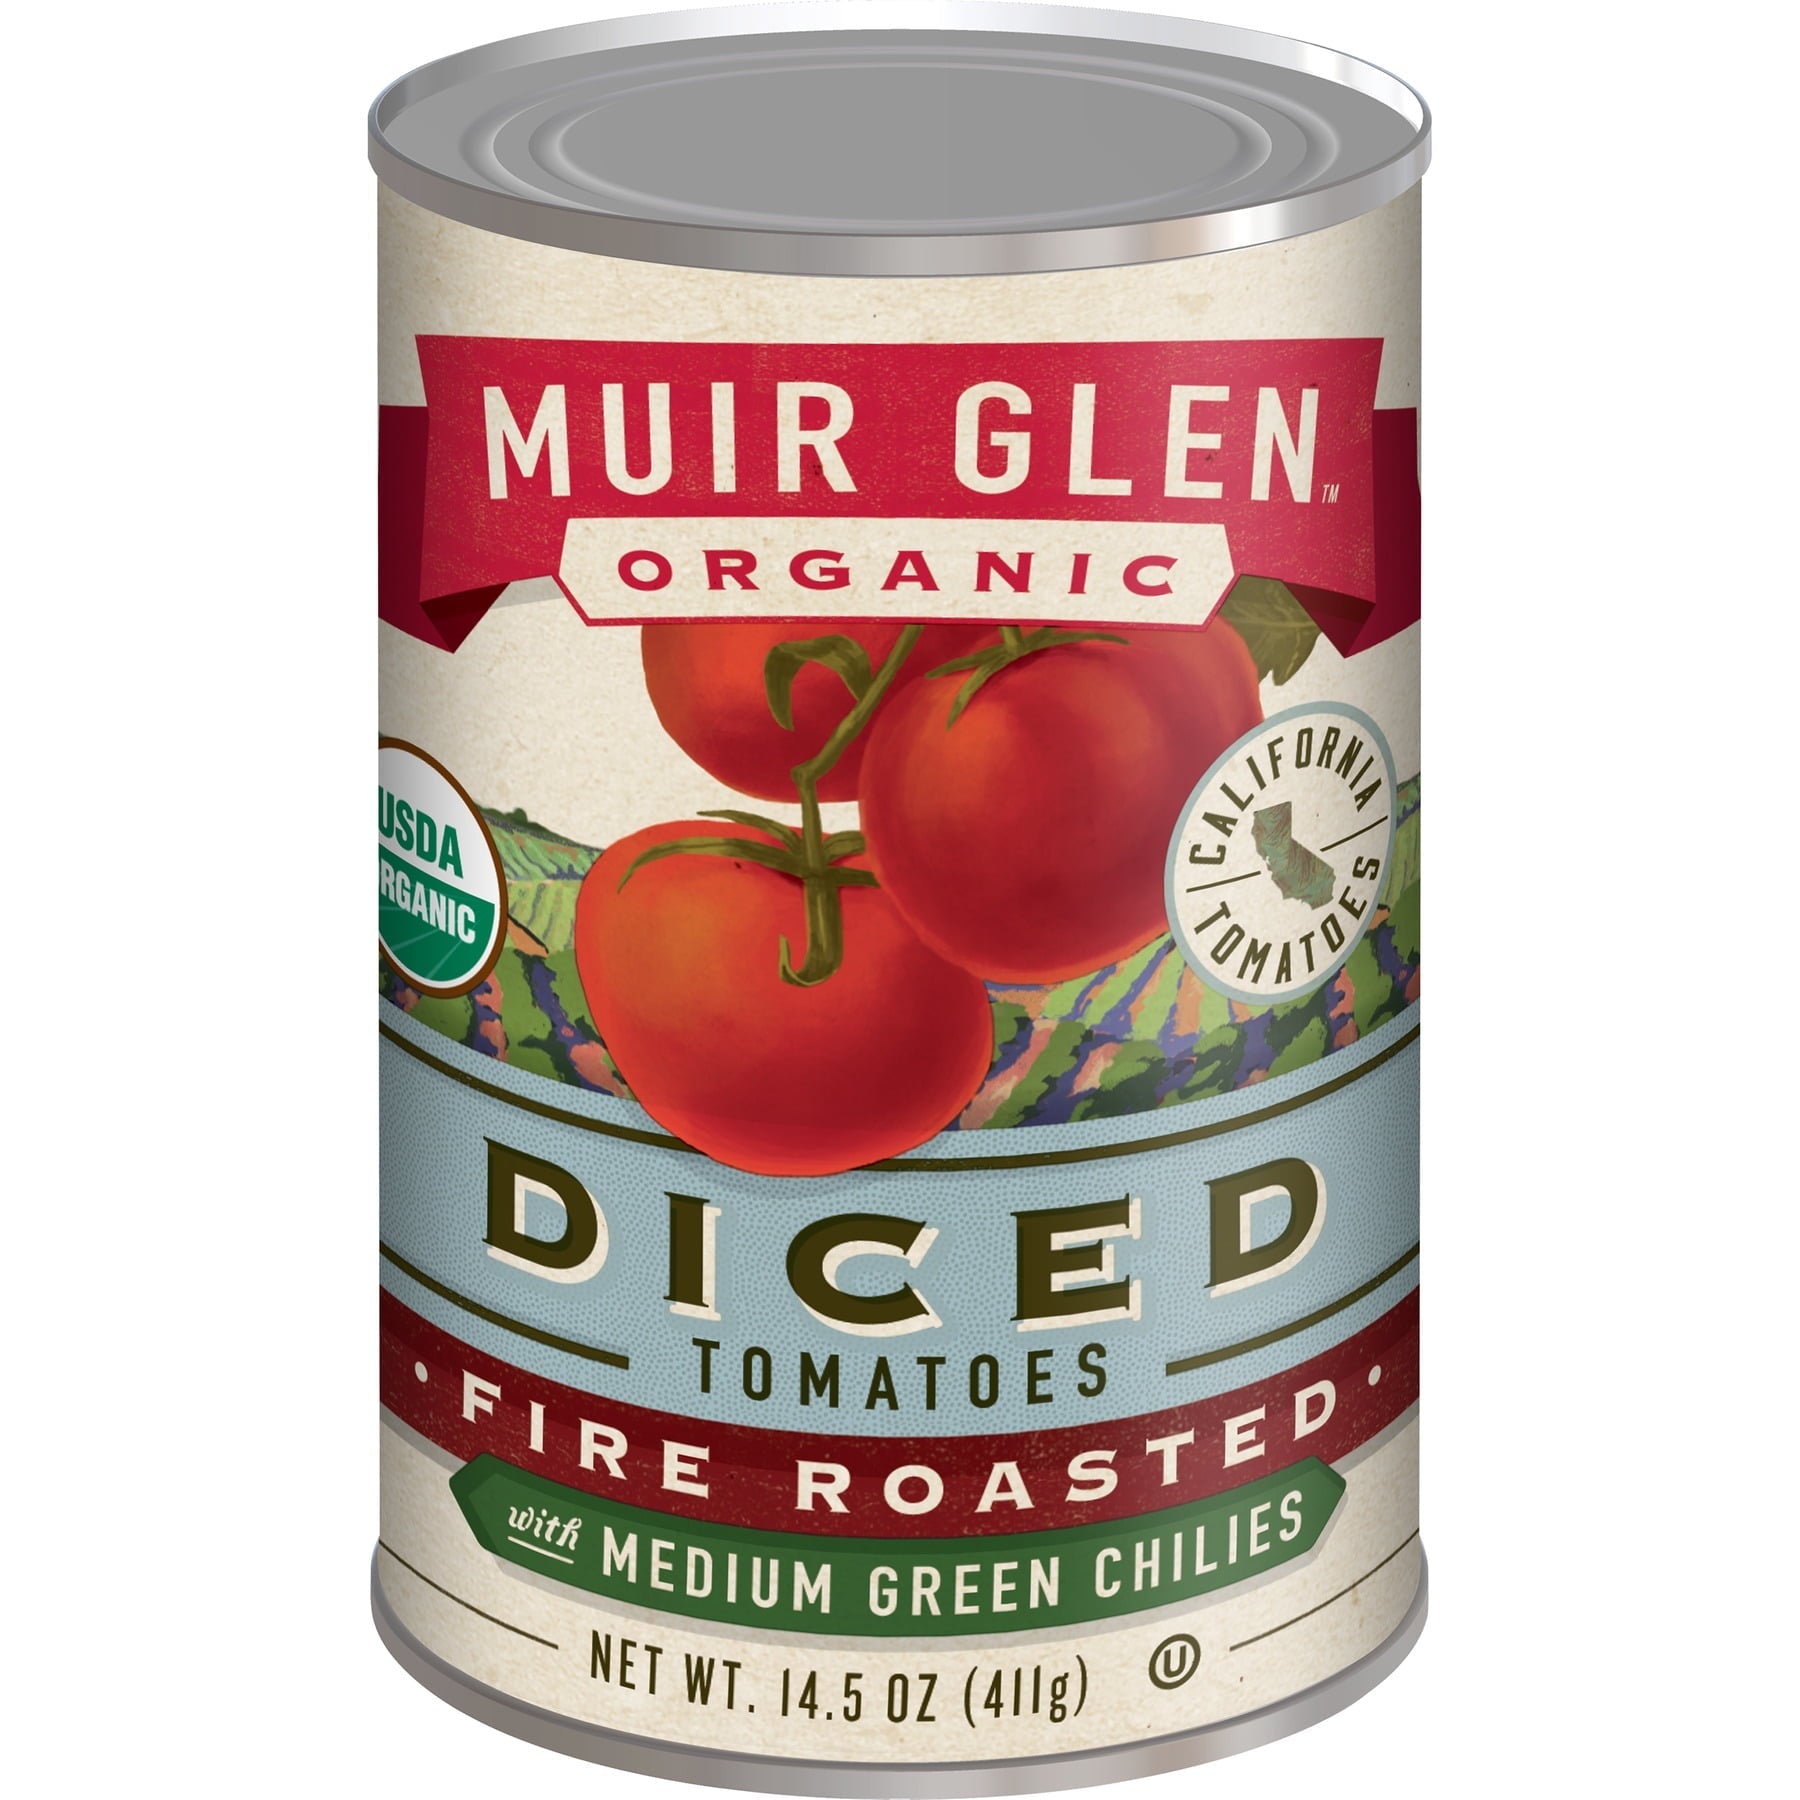 Muir Glen Organic Diced Tomatoes Fire Roasted with Medium Green Chilies 14.5 Oz